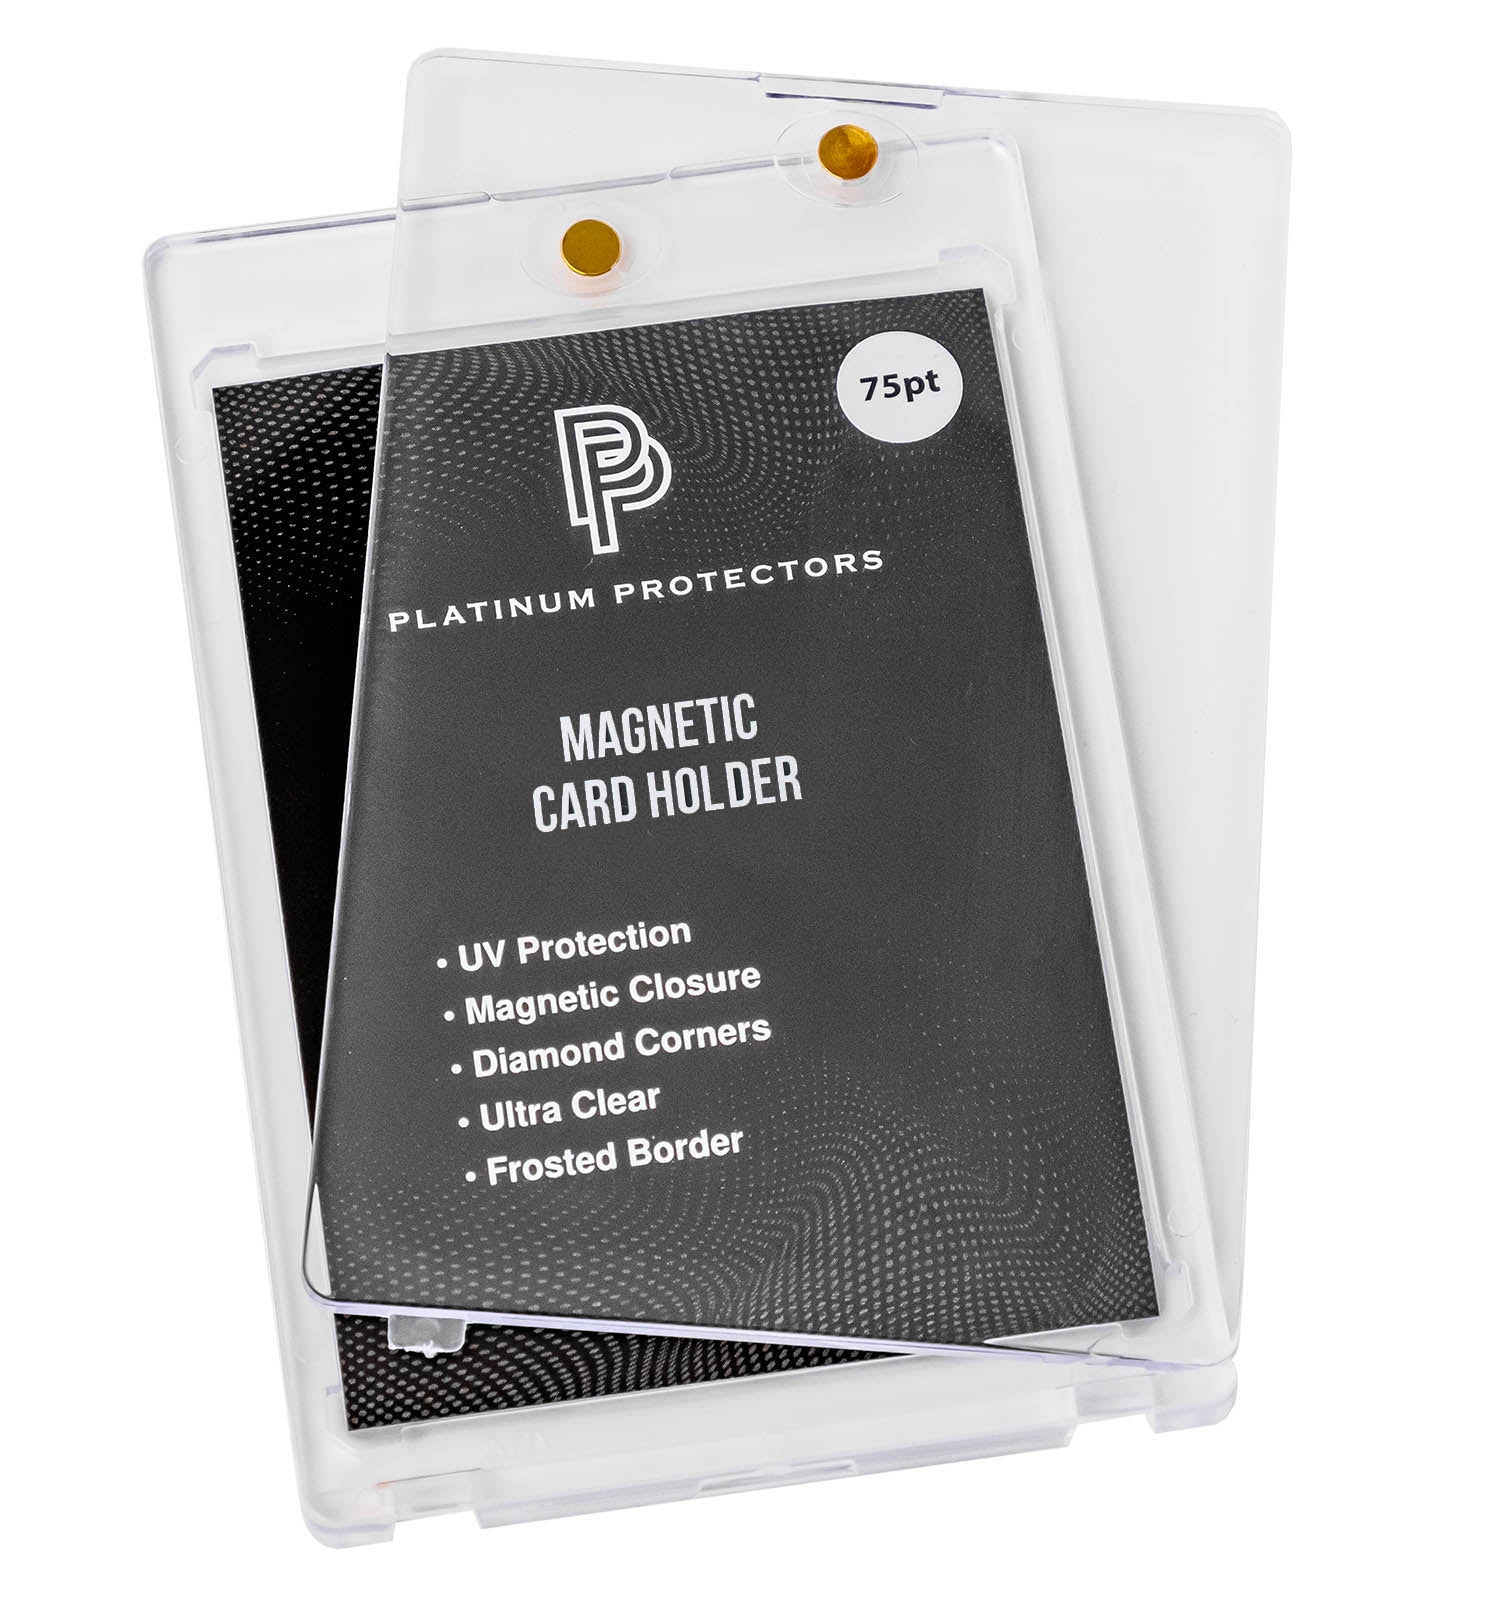 Platinum Protectors Magnetic Card Holders for Trading Cards - 75 pt